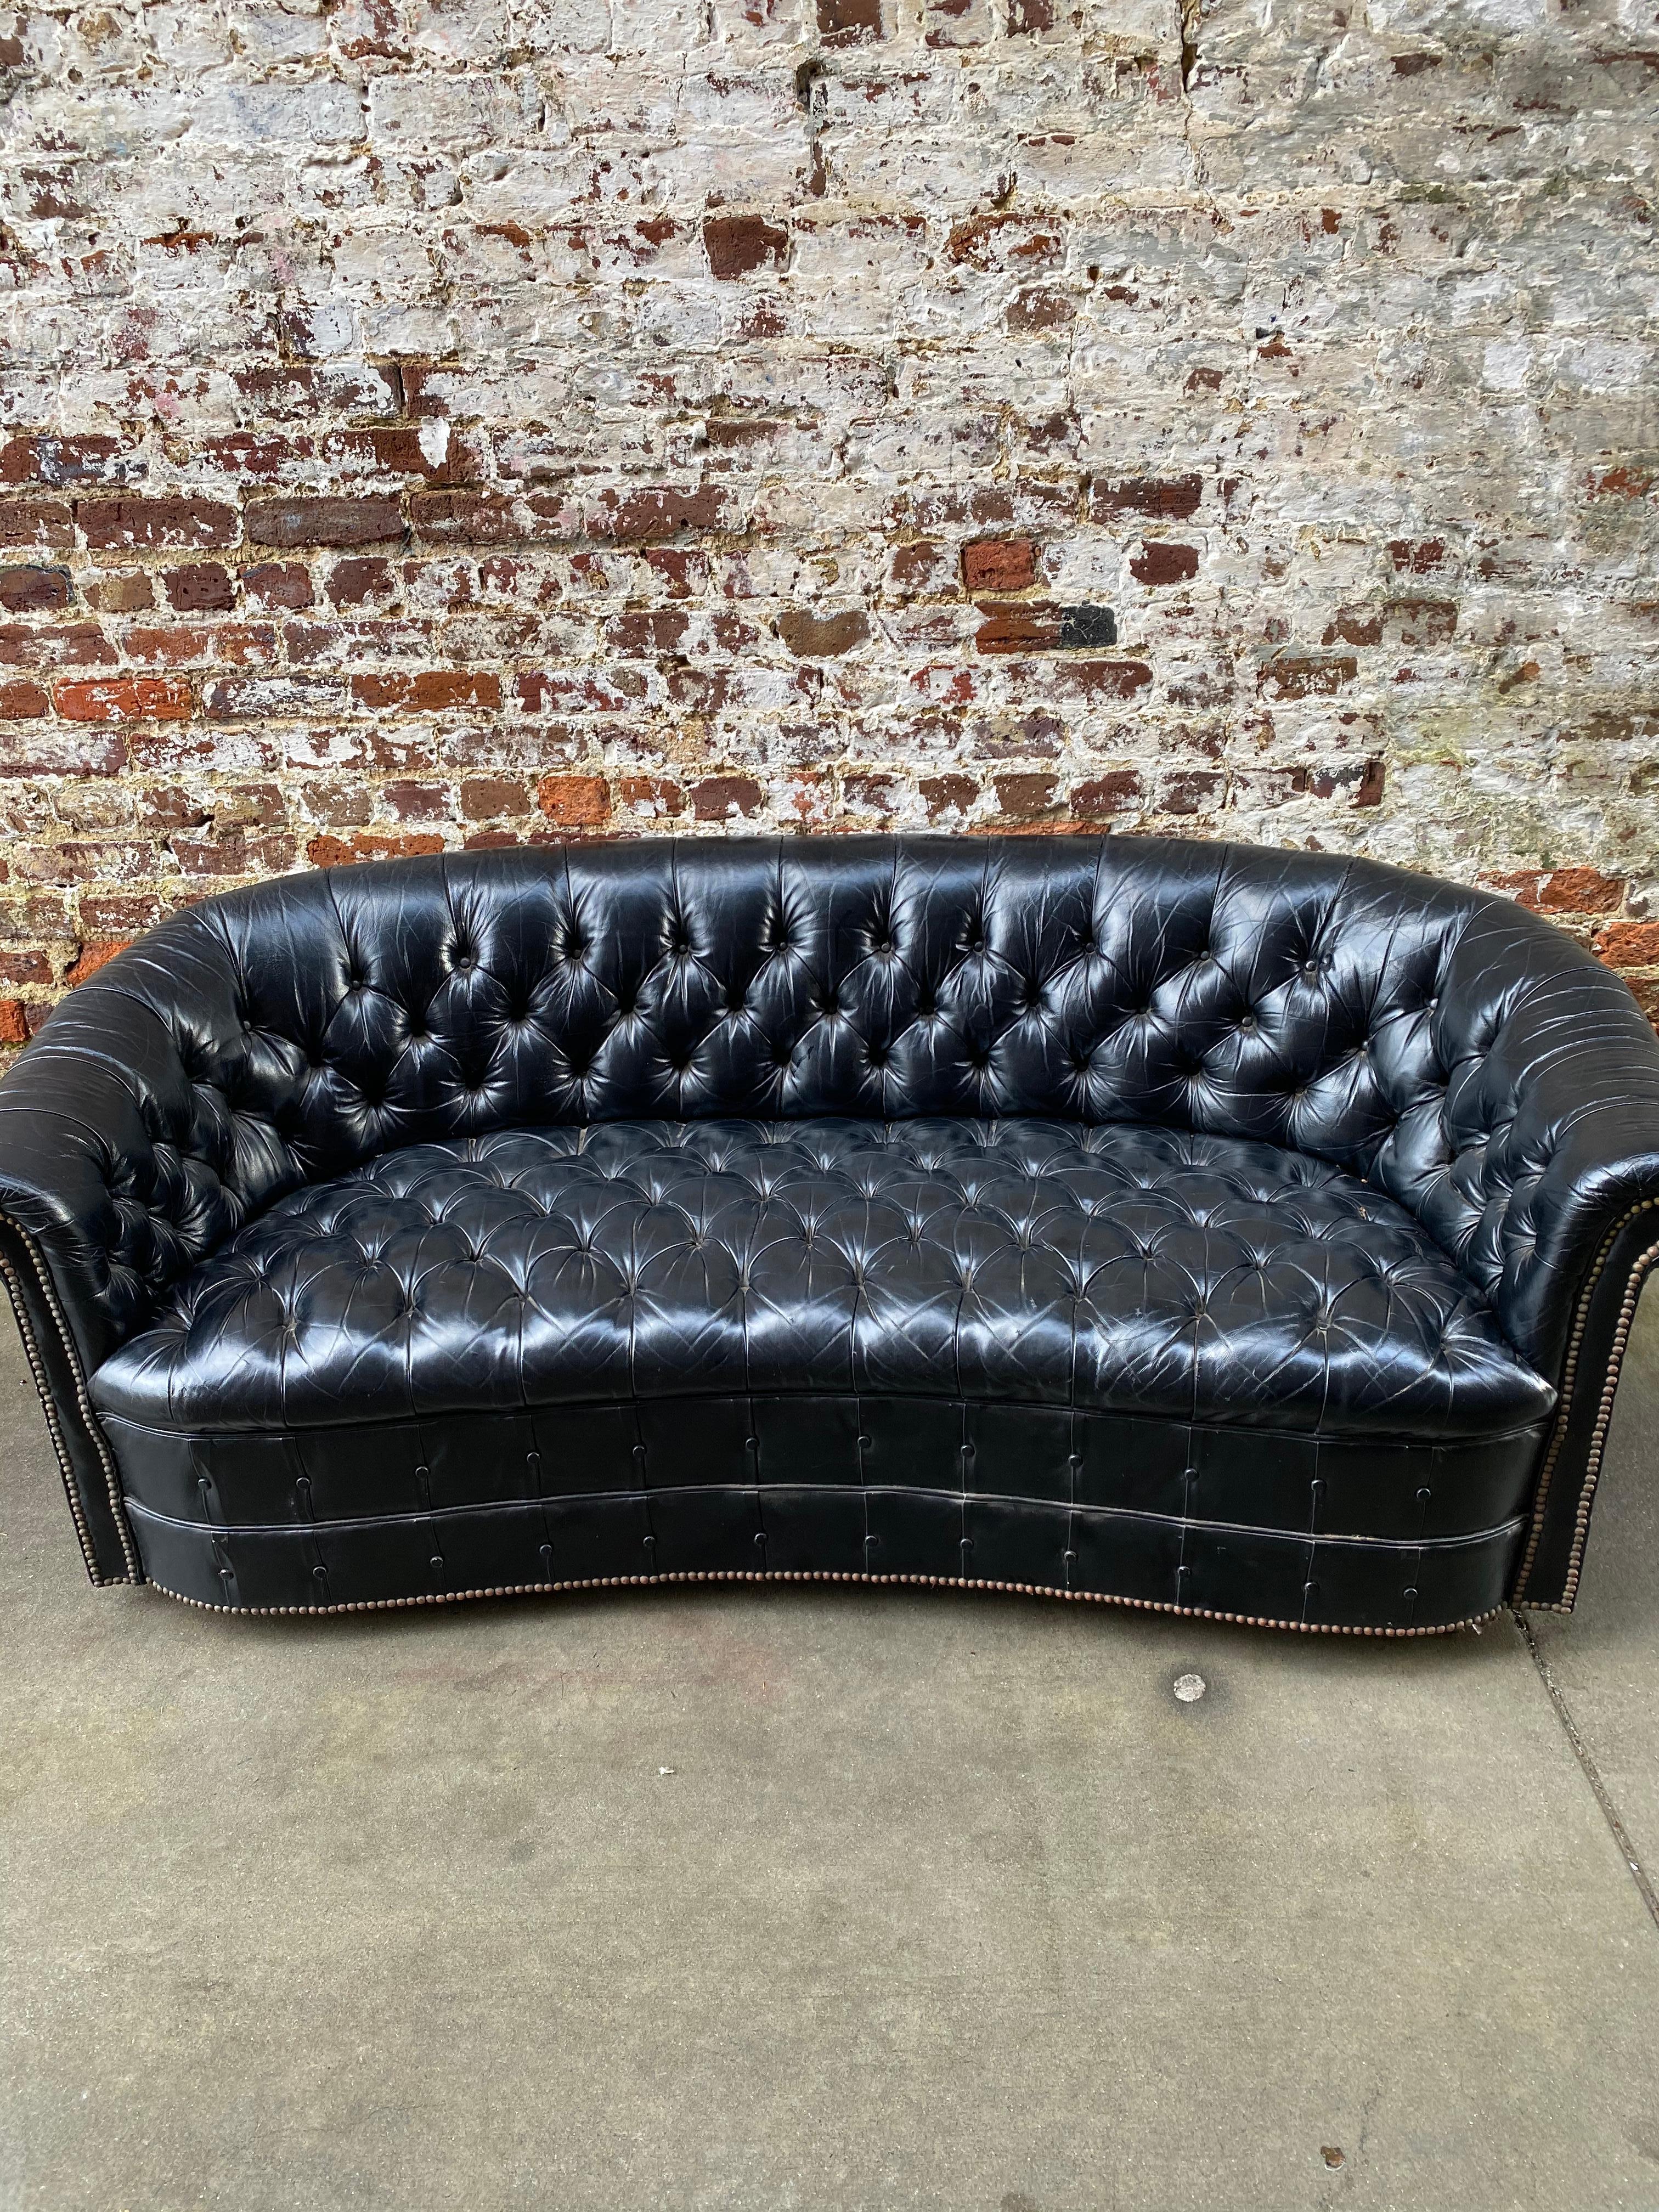 Leather Chesterfield sofa in black leather, early 20th century.